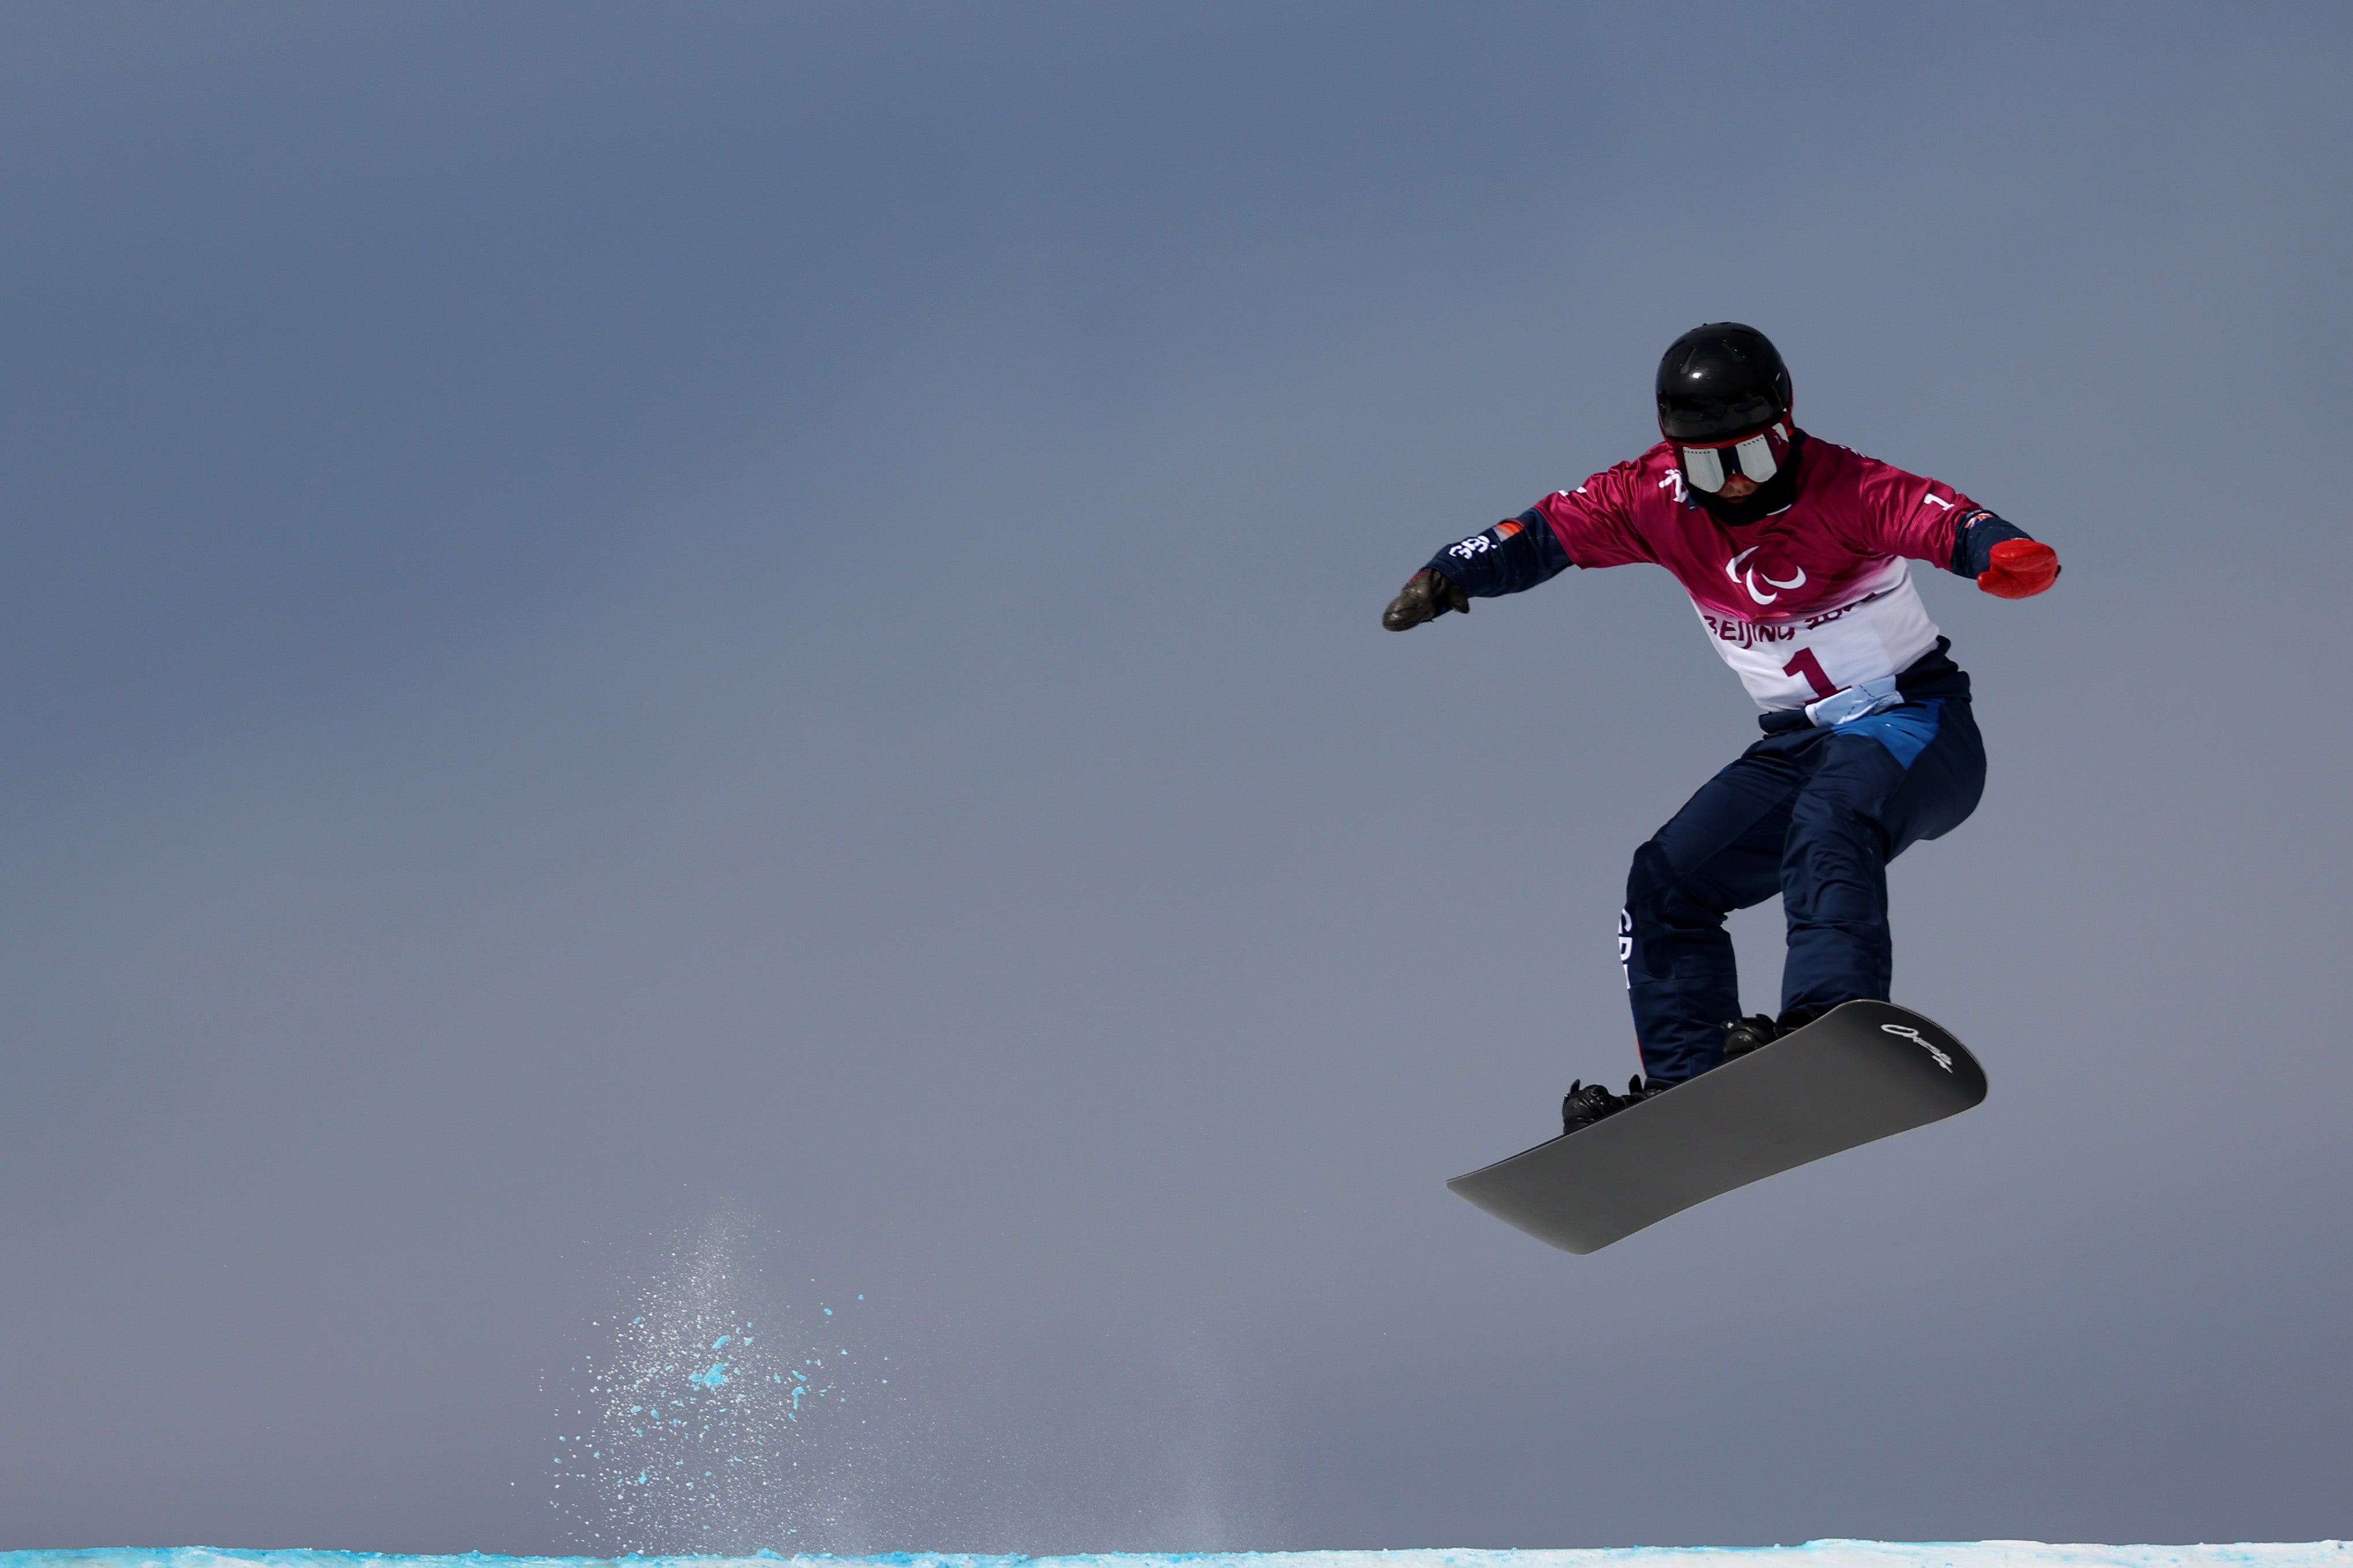 James Barnes-Miller was unable to claim a medal in his favoured snowboard cross event